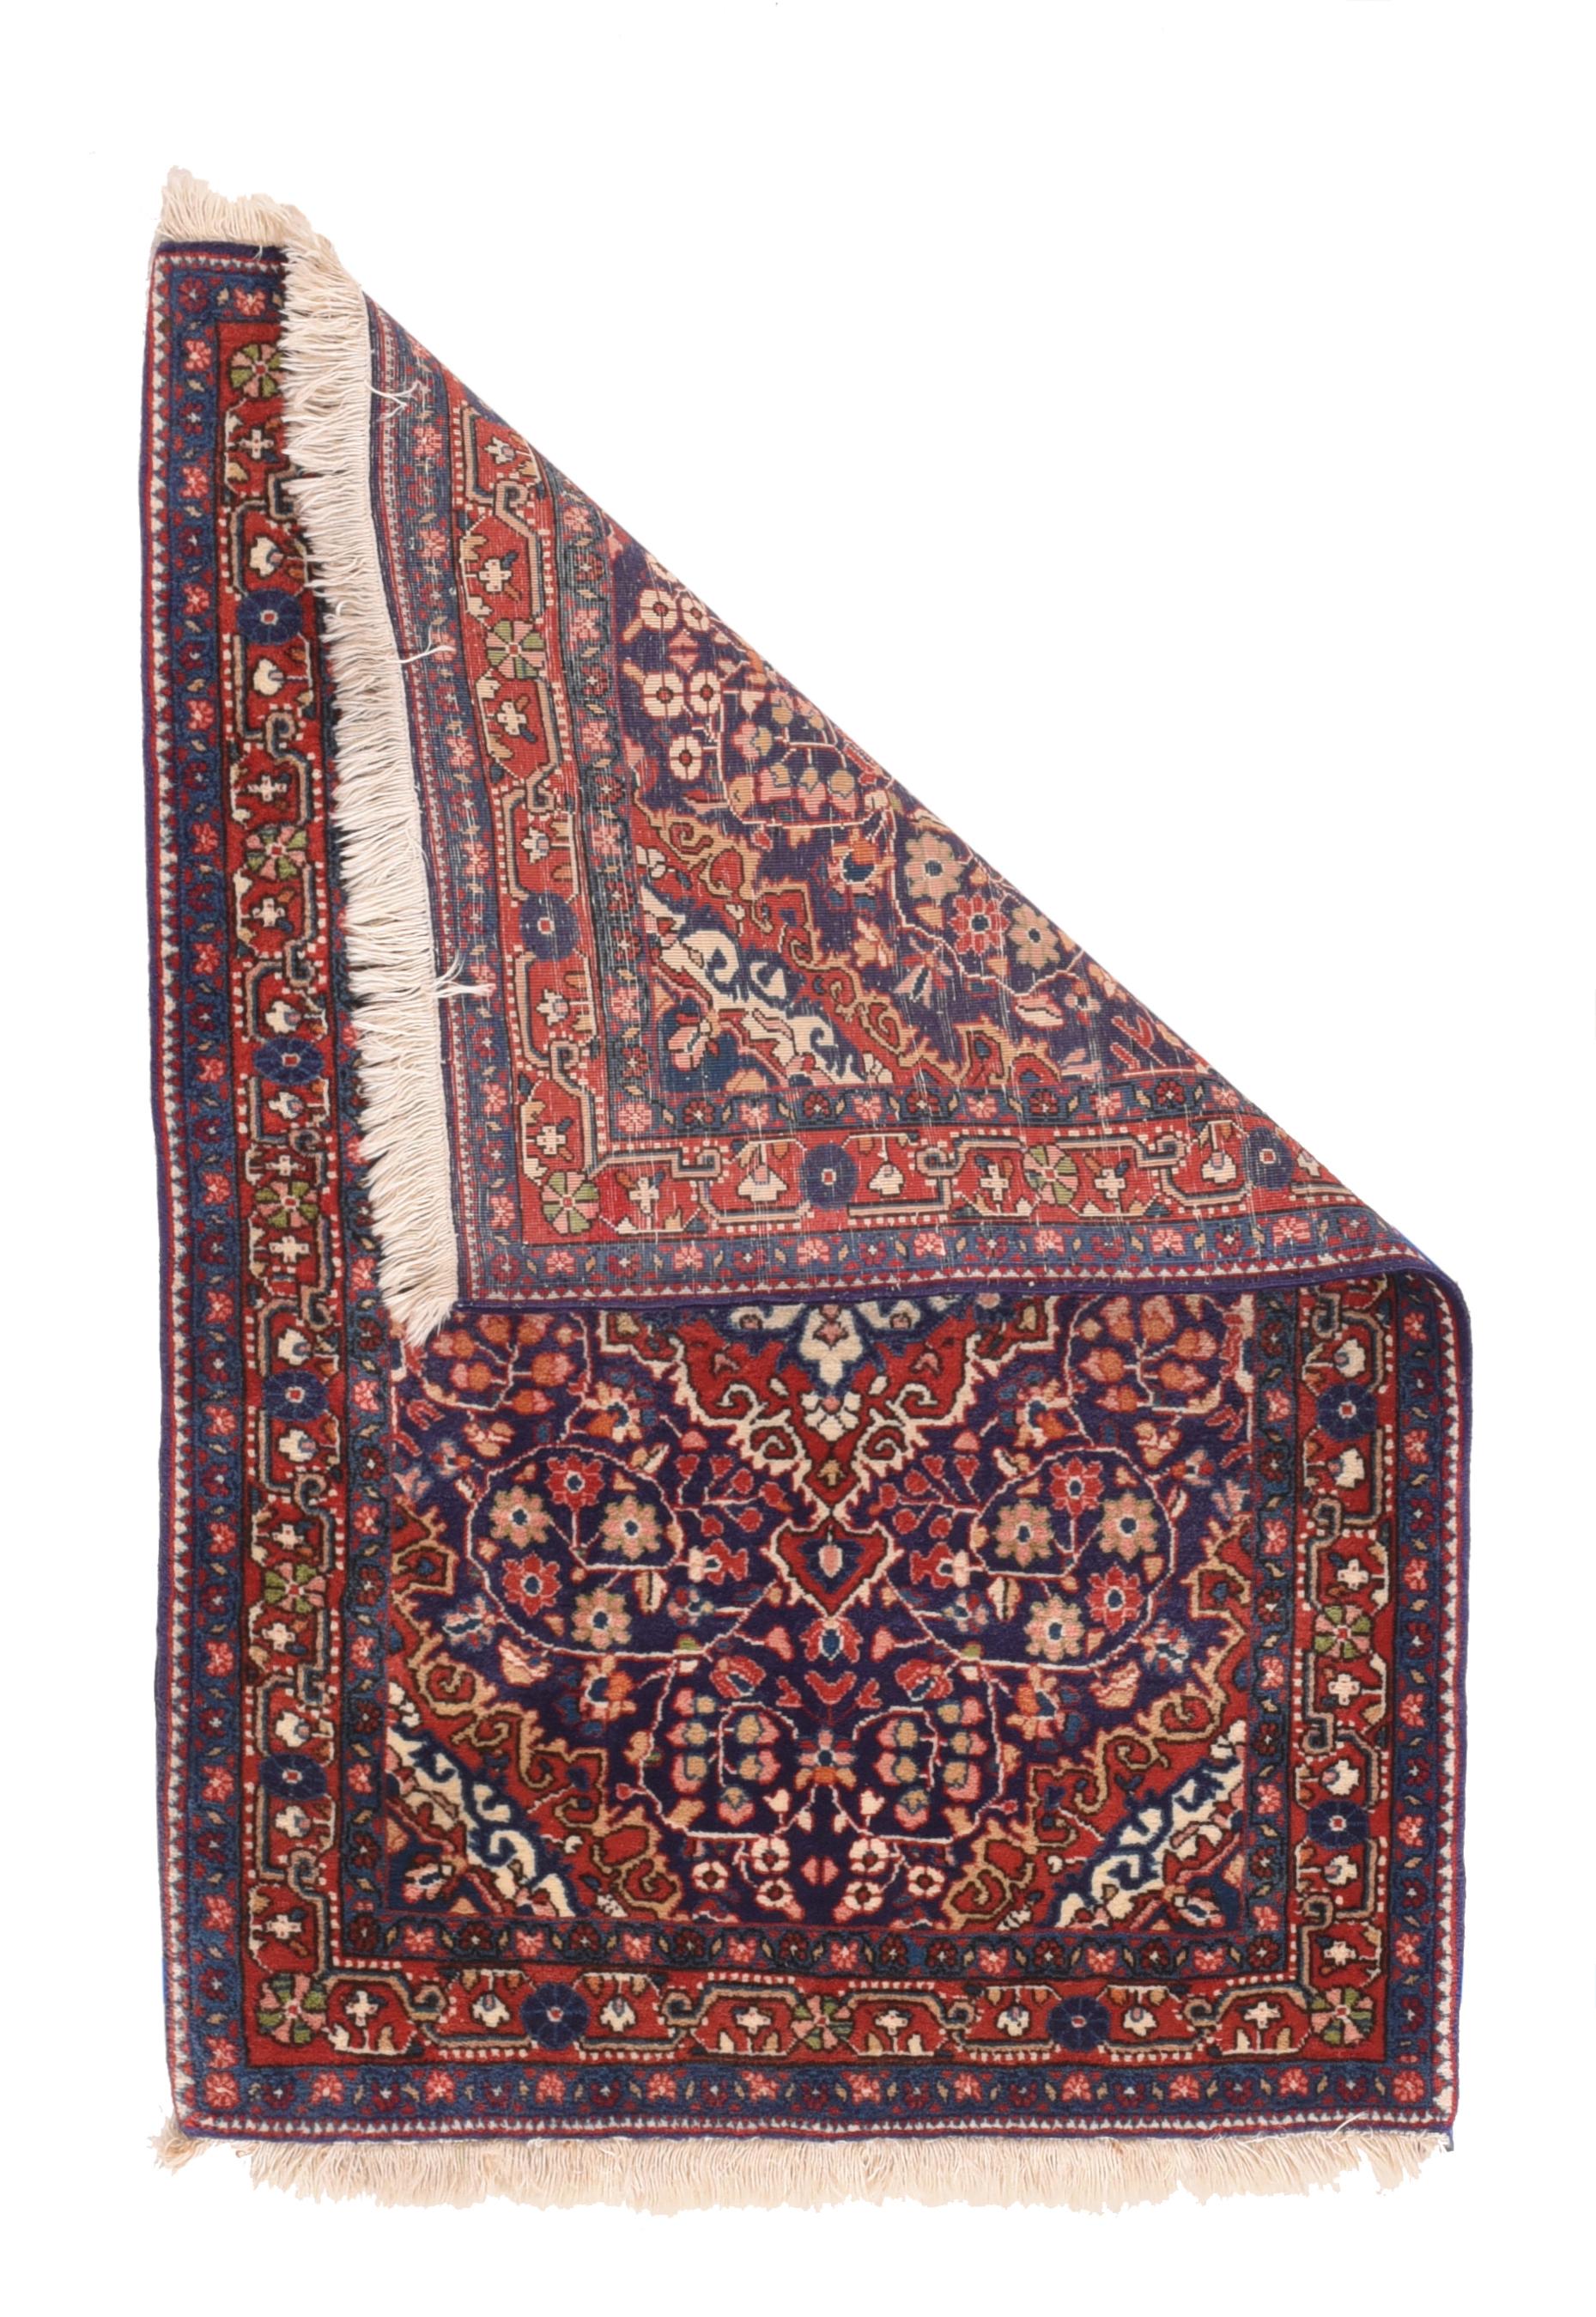 Vintage Sarouk Rug 2'3'' x 3'2''. This well-woven small scatter is woven in or around the village of Jozan, between the Hamadan and Arak weaving areas. The royal blue field shows a pendanted, curly-hooked red medallion with barbed ecru acanthus